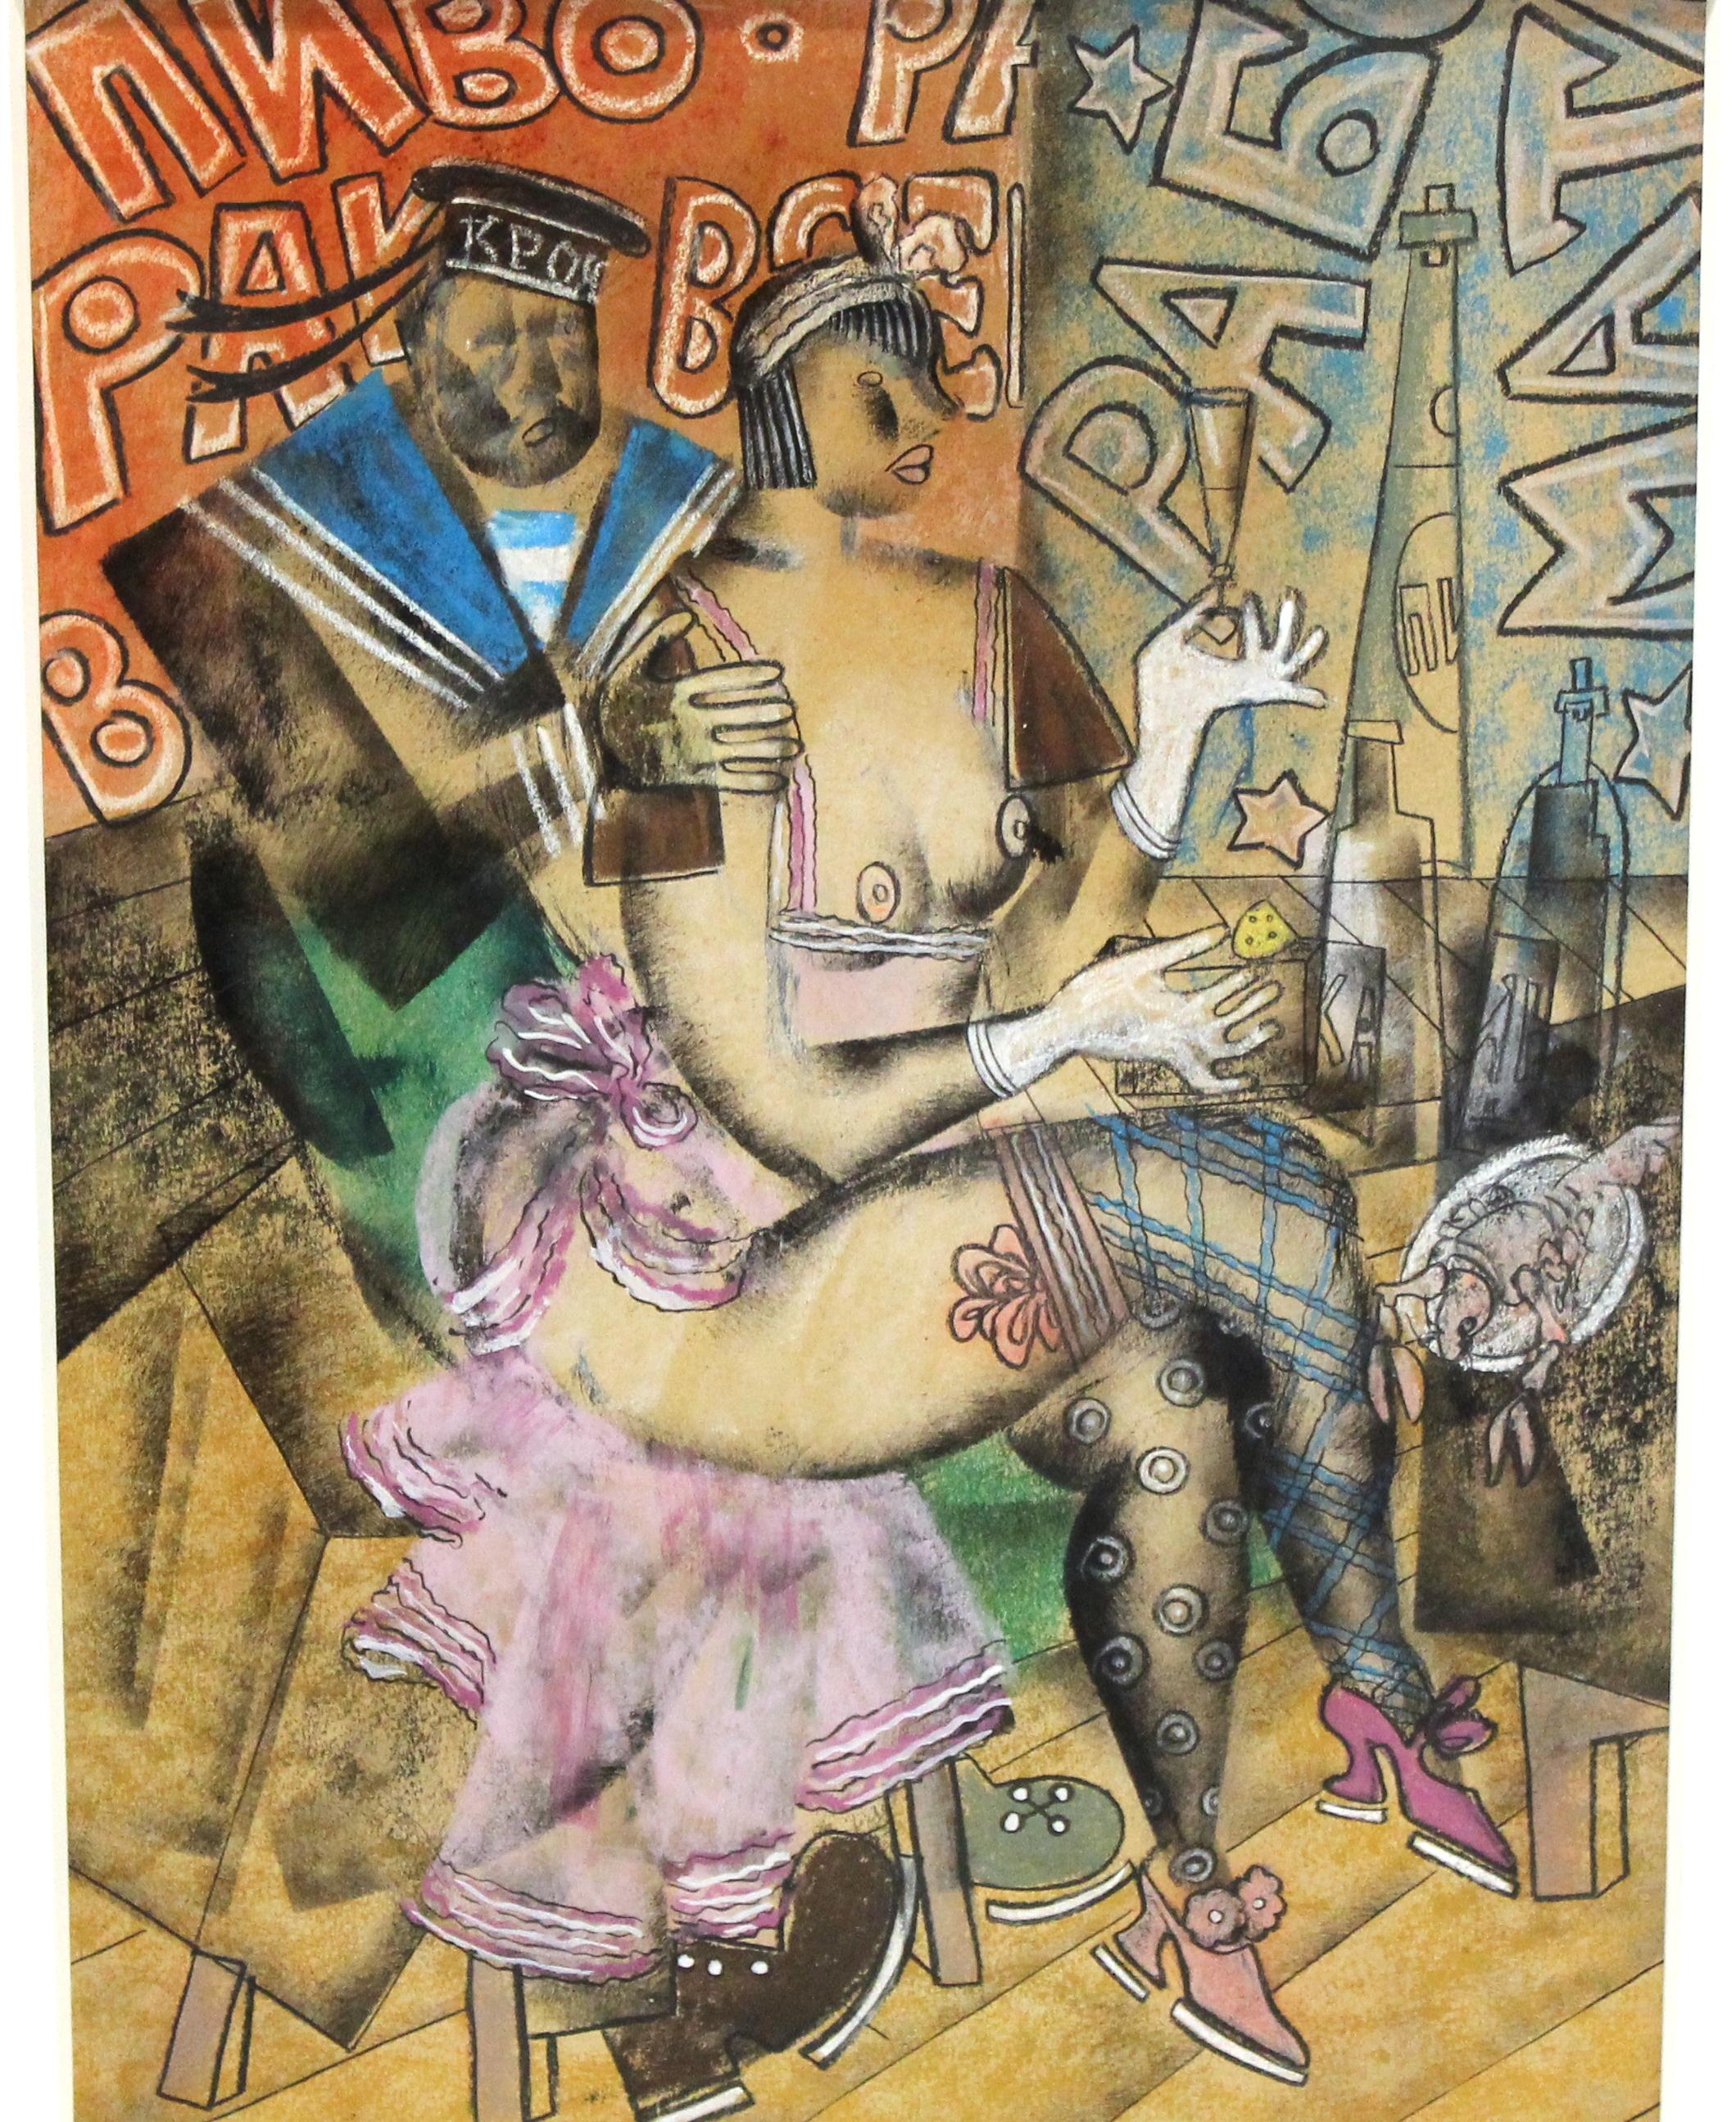 Vladimir Lebedev (1891 - 1967) Russian Avant-Garde mixed media work on paper (ink, gouache, pencil) depicting a seated nude working girl in company of a sailor. The piece includes visible elements of Bolshevik propaganda and was created by Lebedev